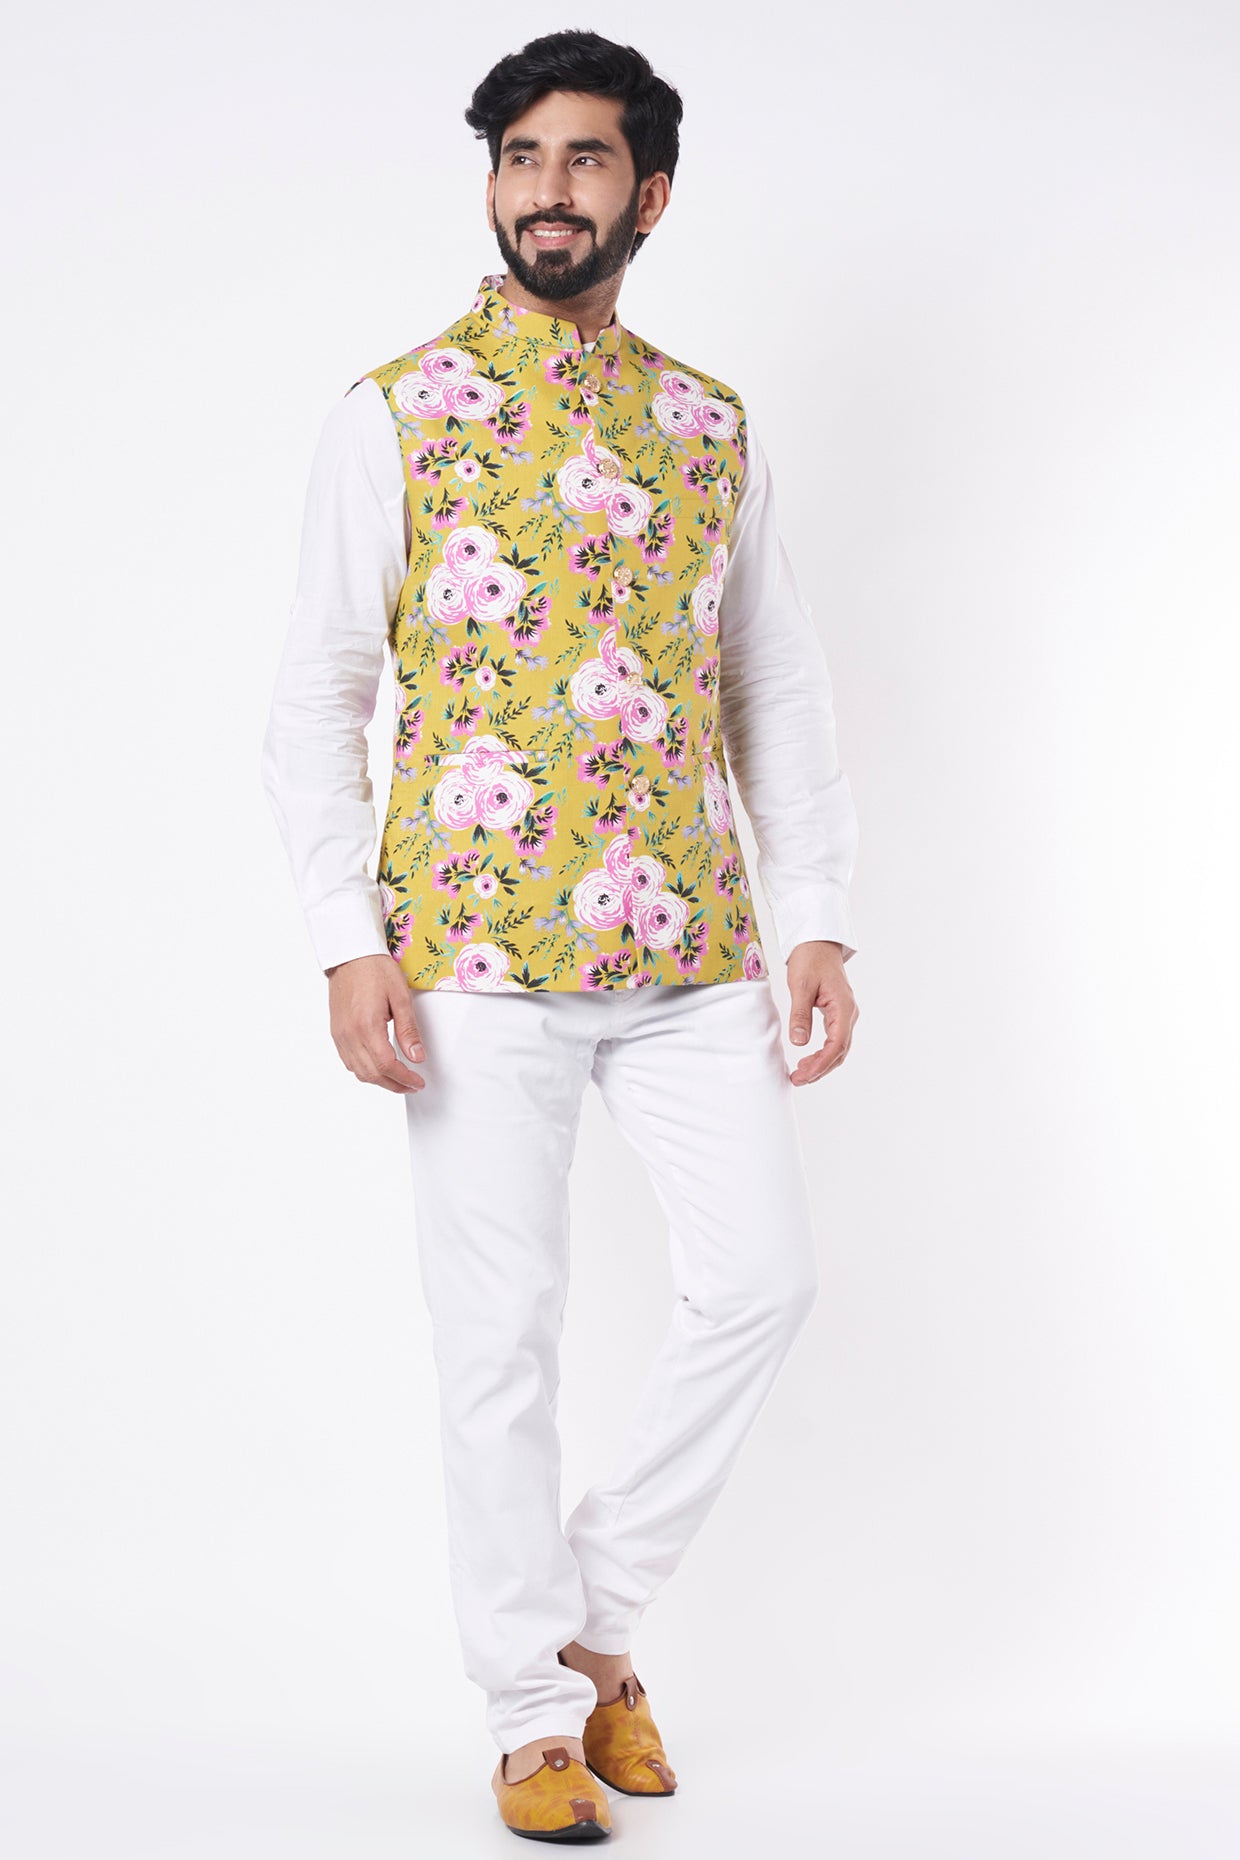 Off-White Poly Silk Floral Printed Nehru Jacket Set Design by BRAHAAN at  Pernia's Pop Up Shop 2024